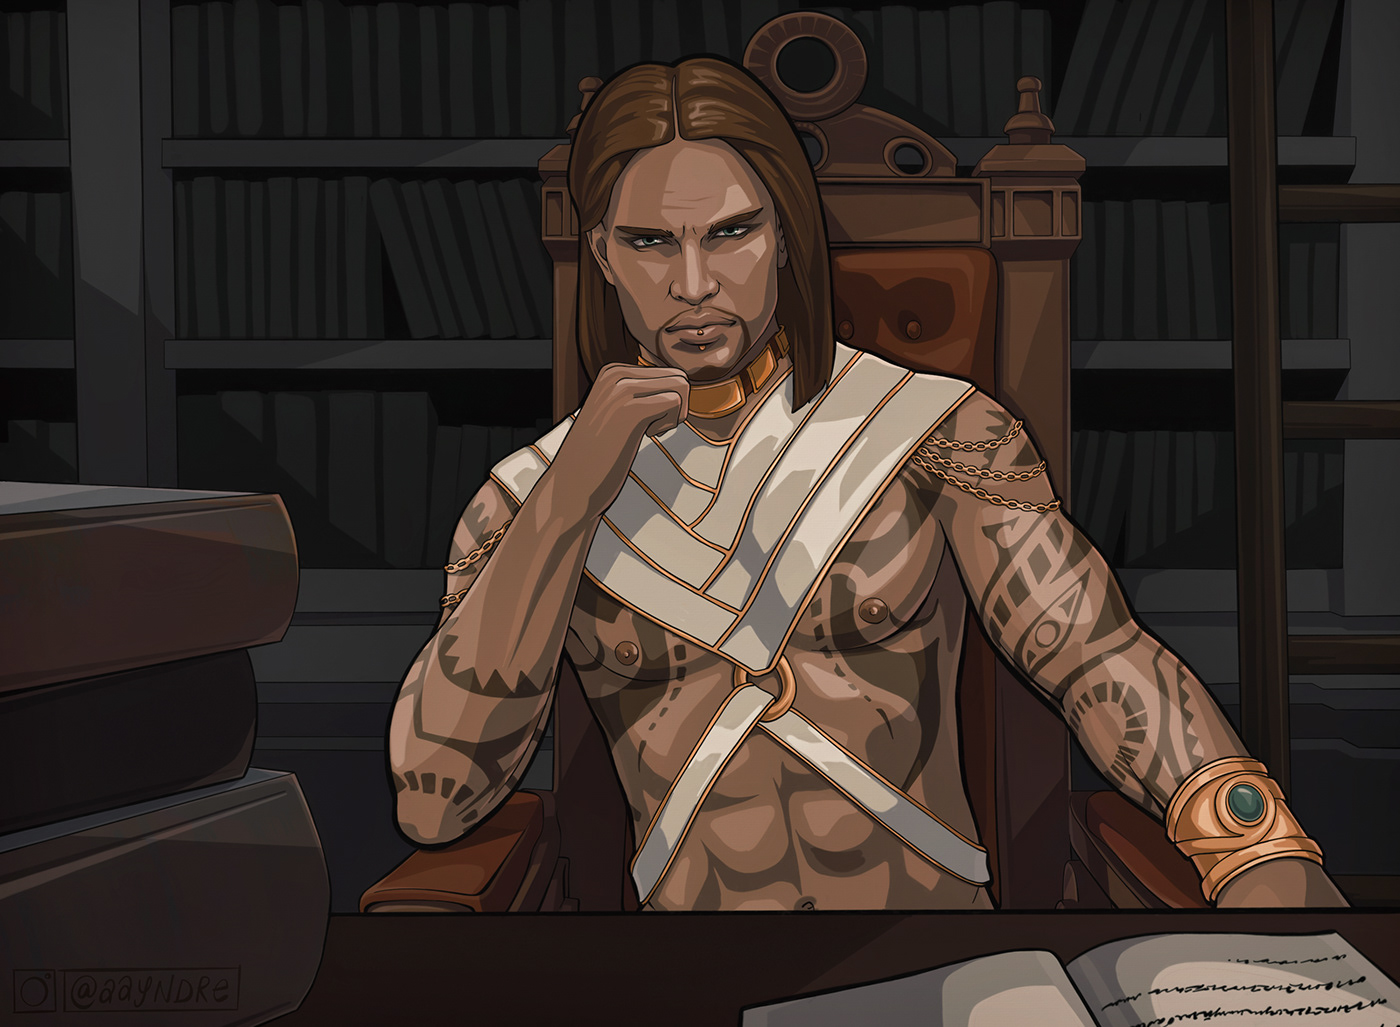 Conan: Stygian scholar. Commission for Ankhareth on Conan Exiles: The Exiled RPvP server
